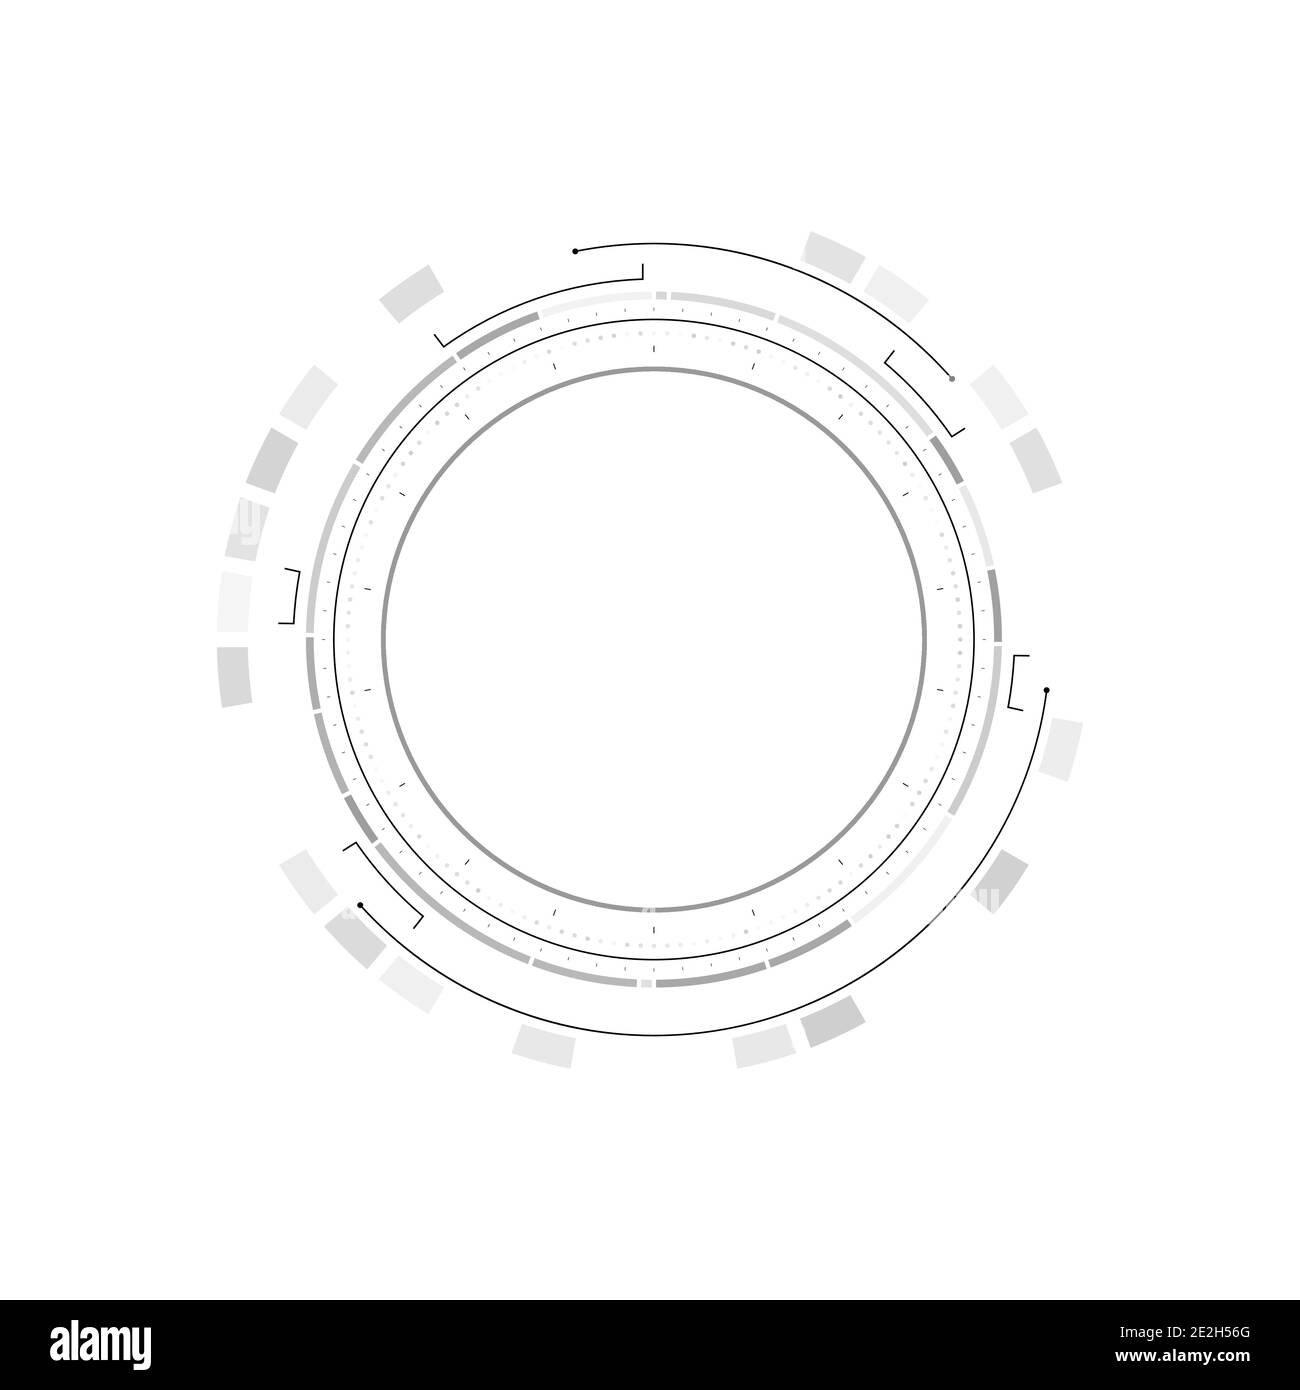 HUD circle infographic elements. Sci-fi round head-up display for futuristic user interface HUD, GUI. Tech and science theme. Vector illustration. Stock Vector